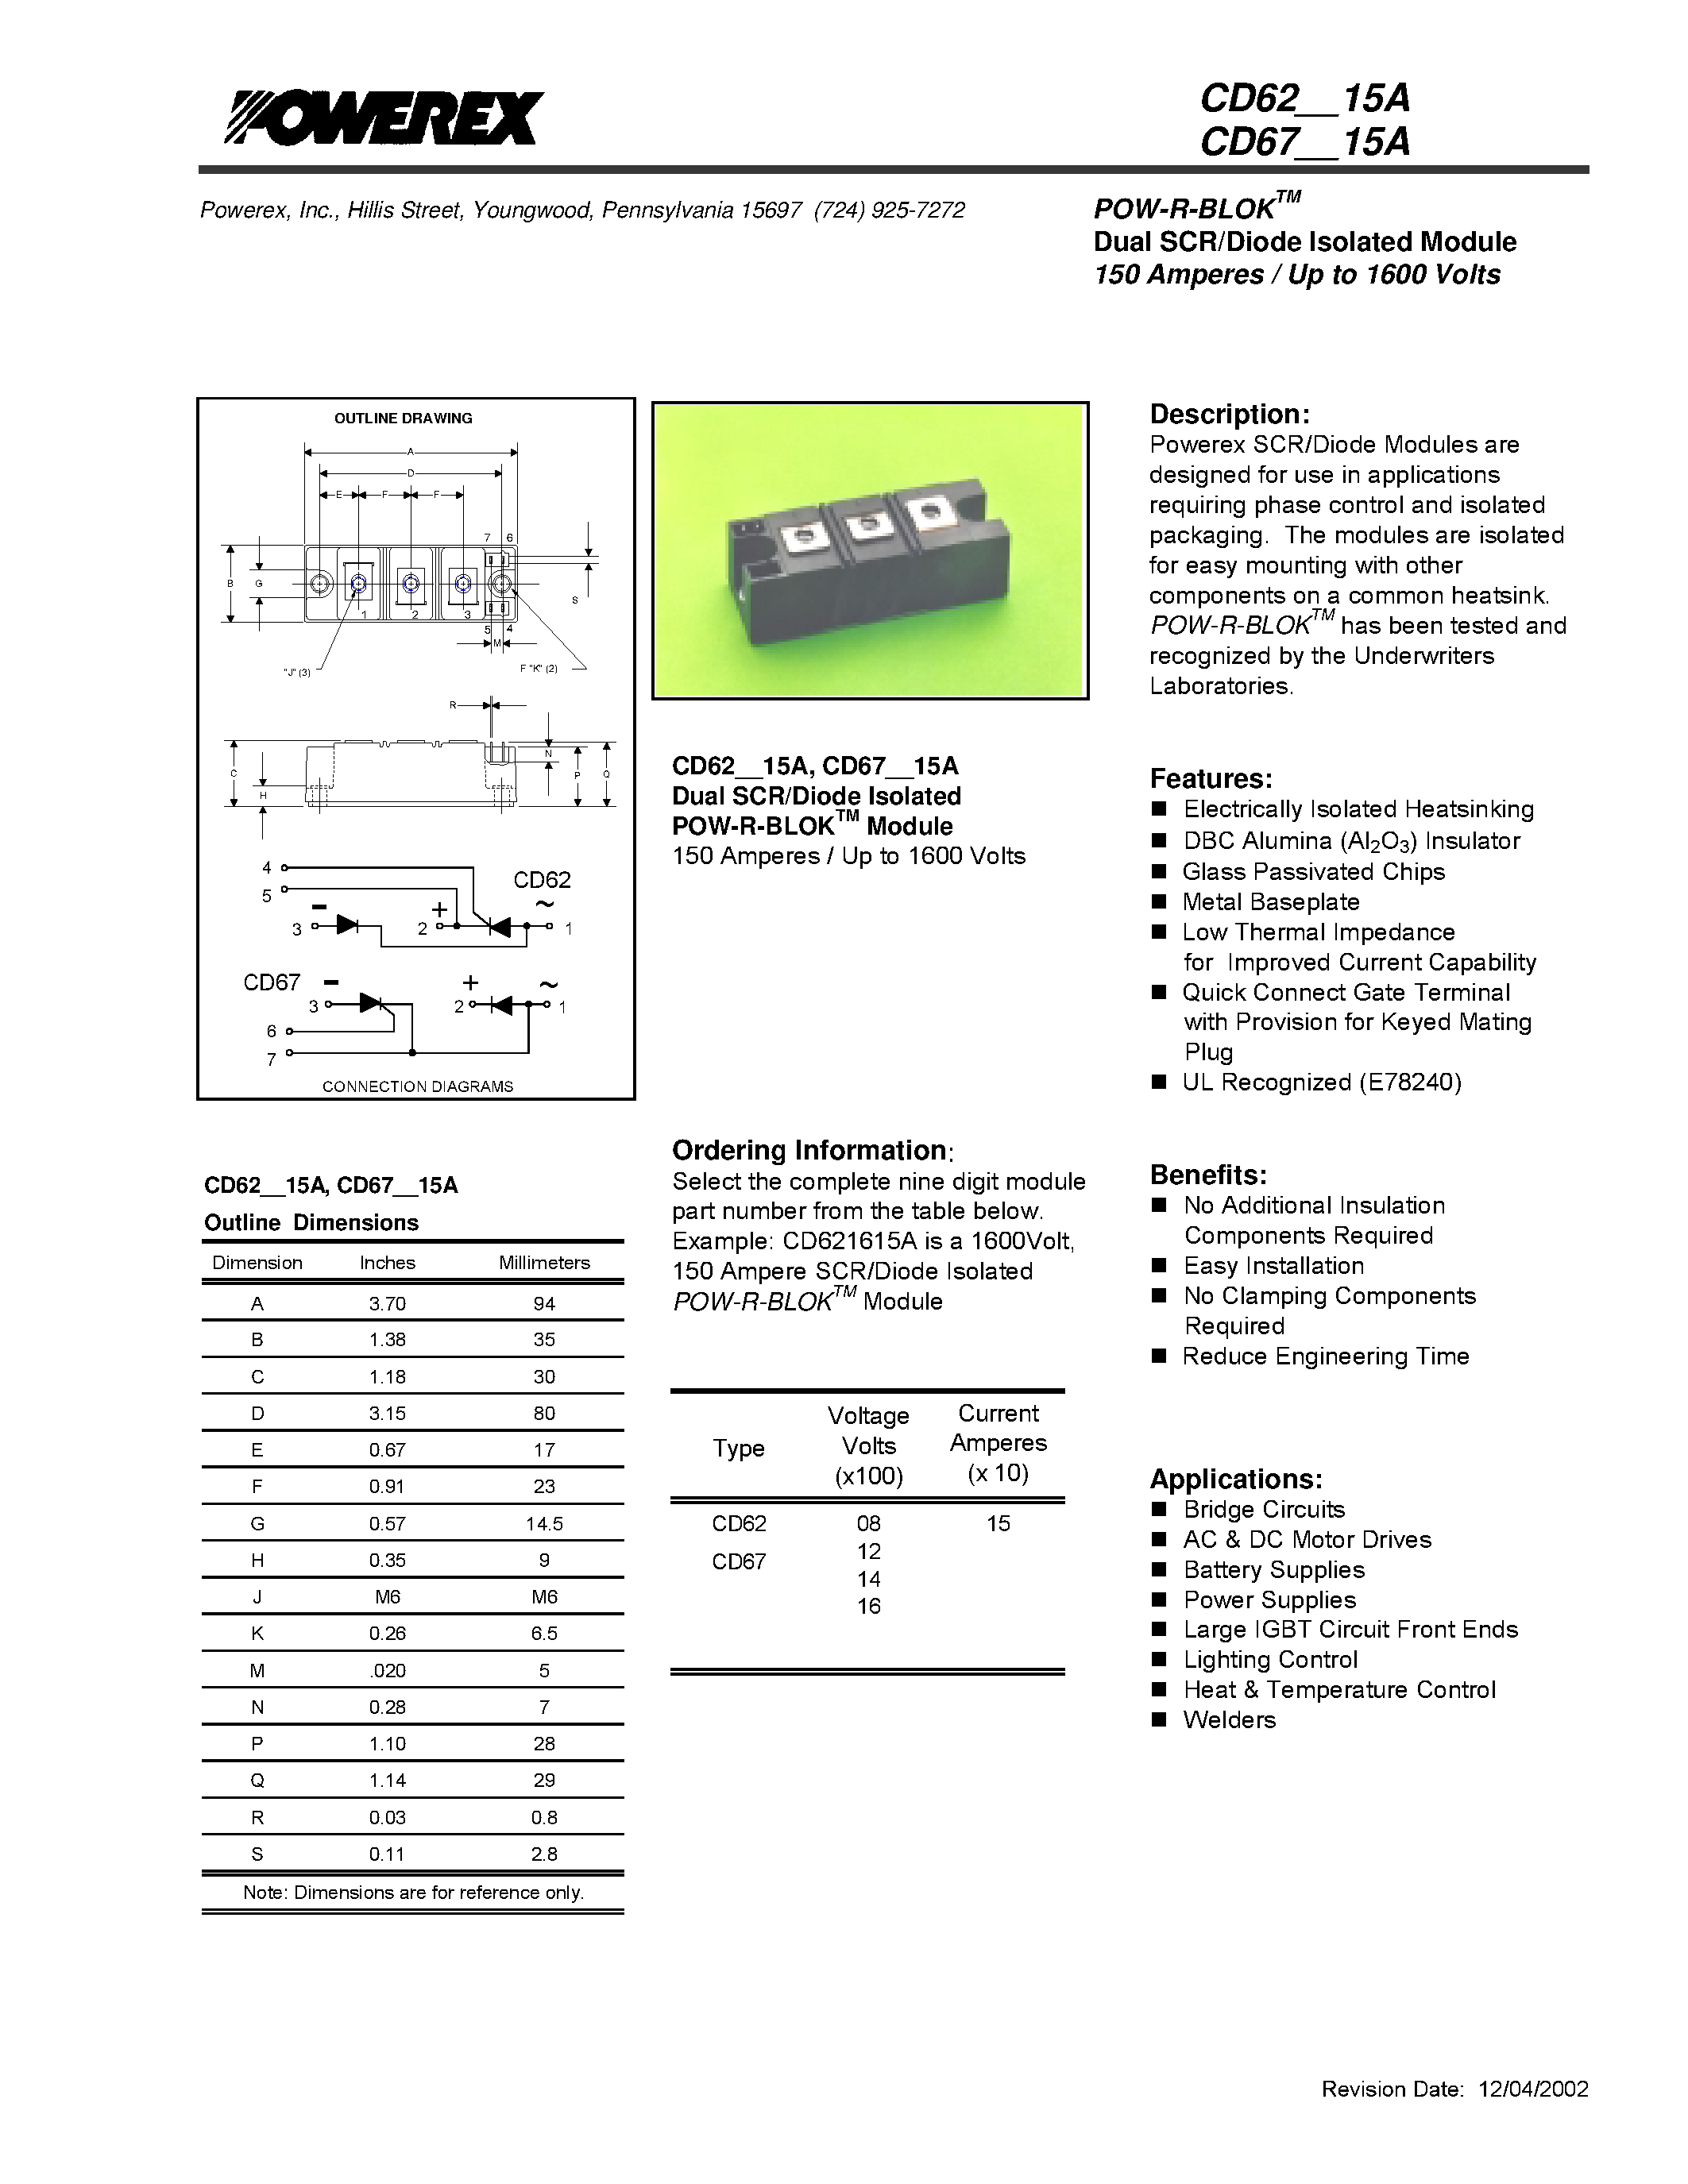 Datasheet CD620815A - POW-R-BLOK Dual SCR/Diode Isolated Module 150 Amperes / Up to 1600 Volts page 1